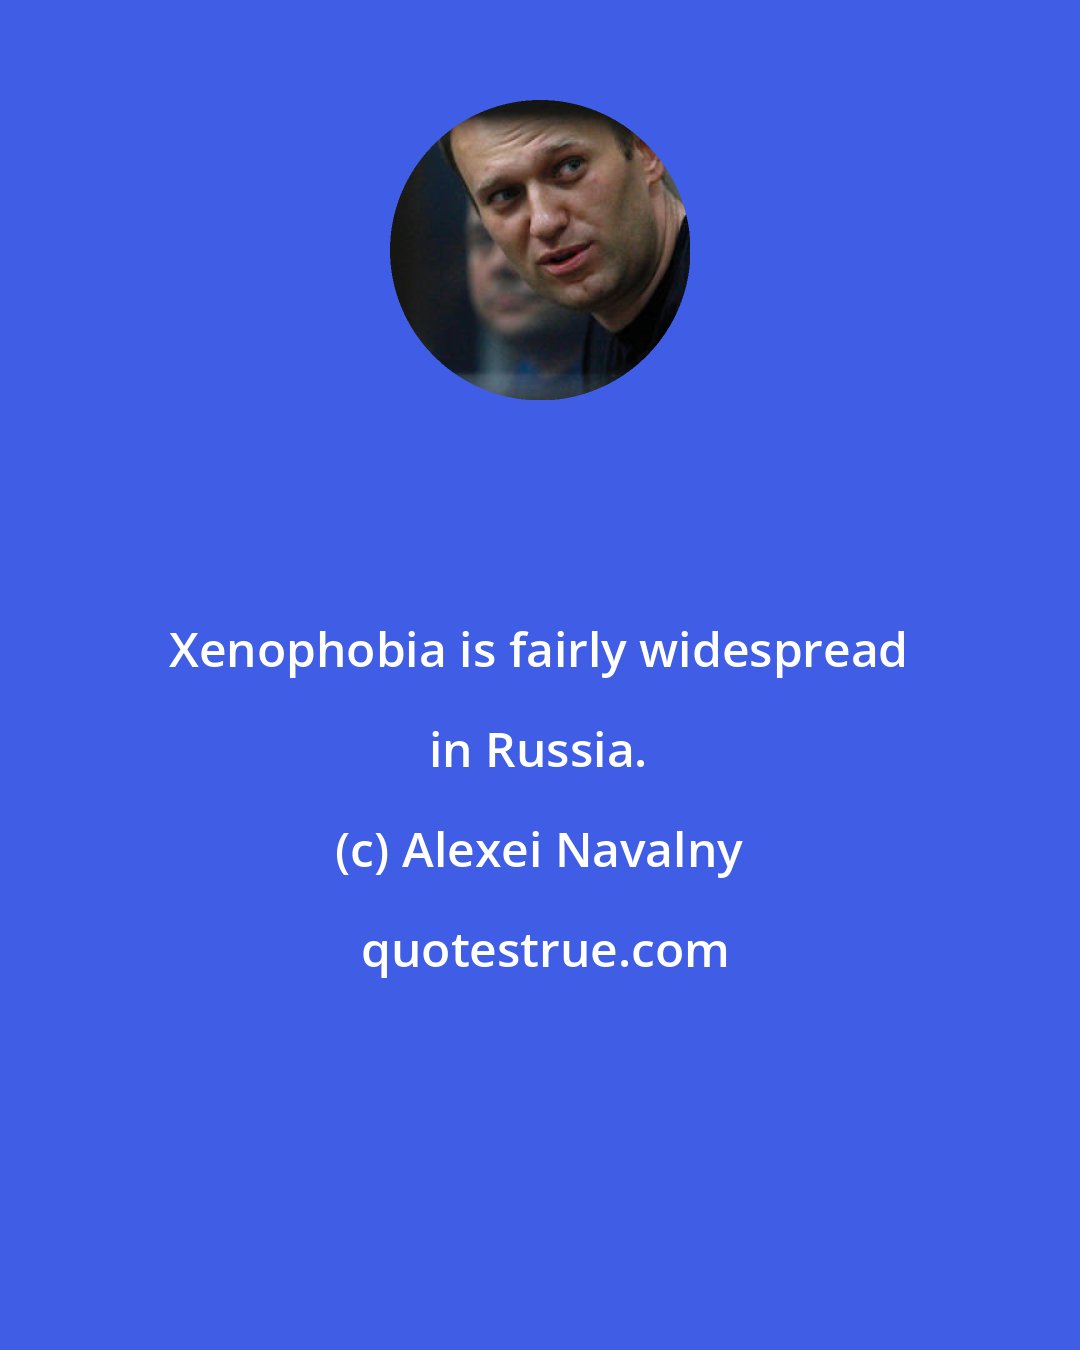 Alexei Navalny: Xenophobia is fairly widespread in Russia.